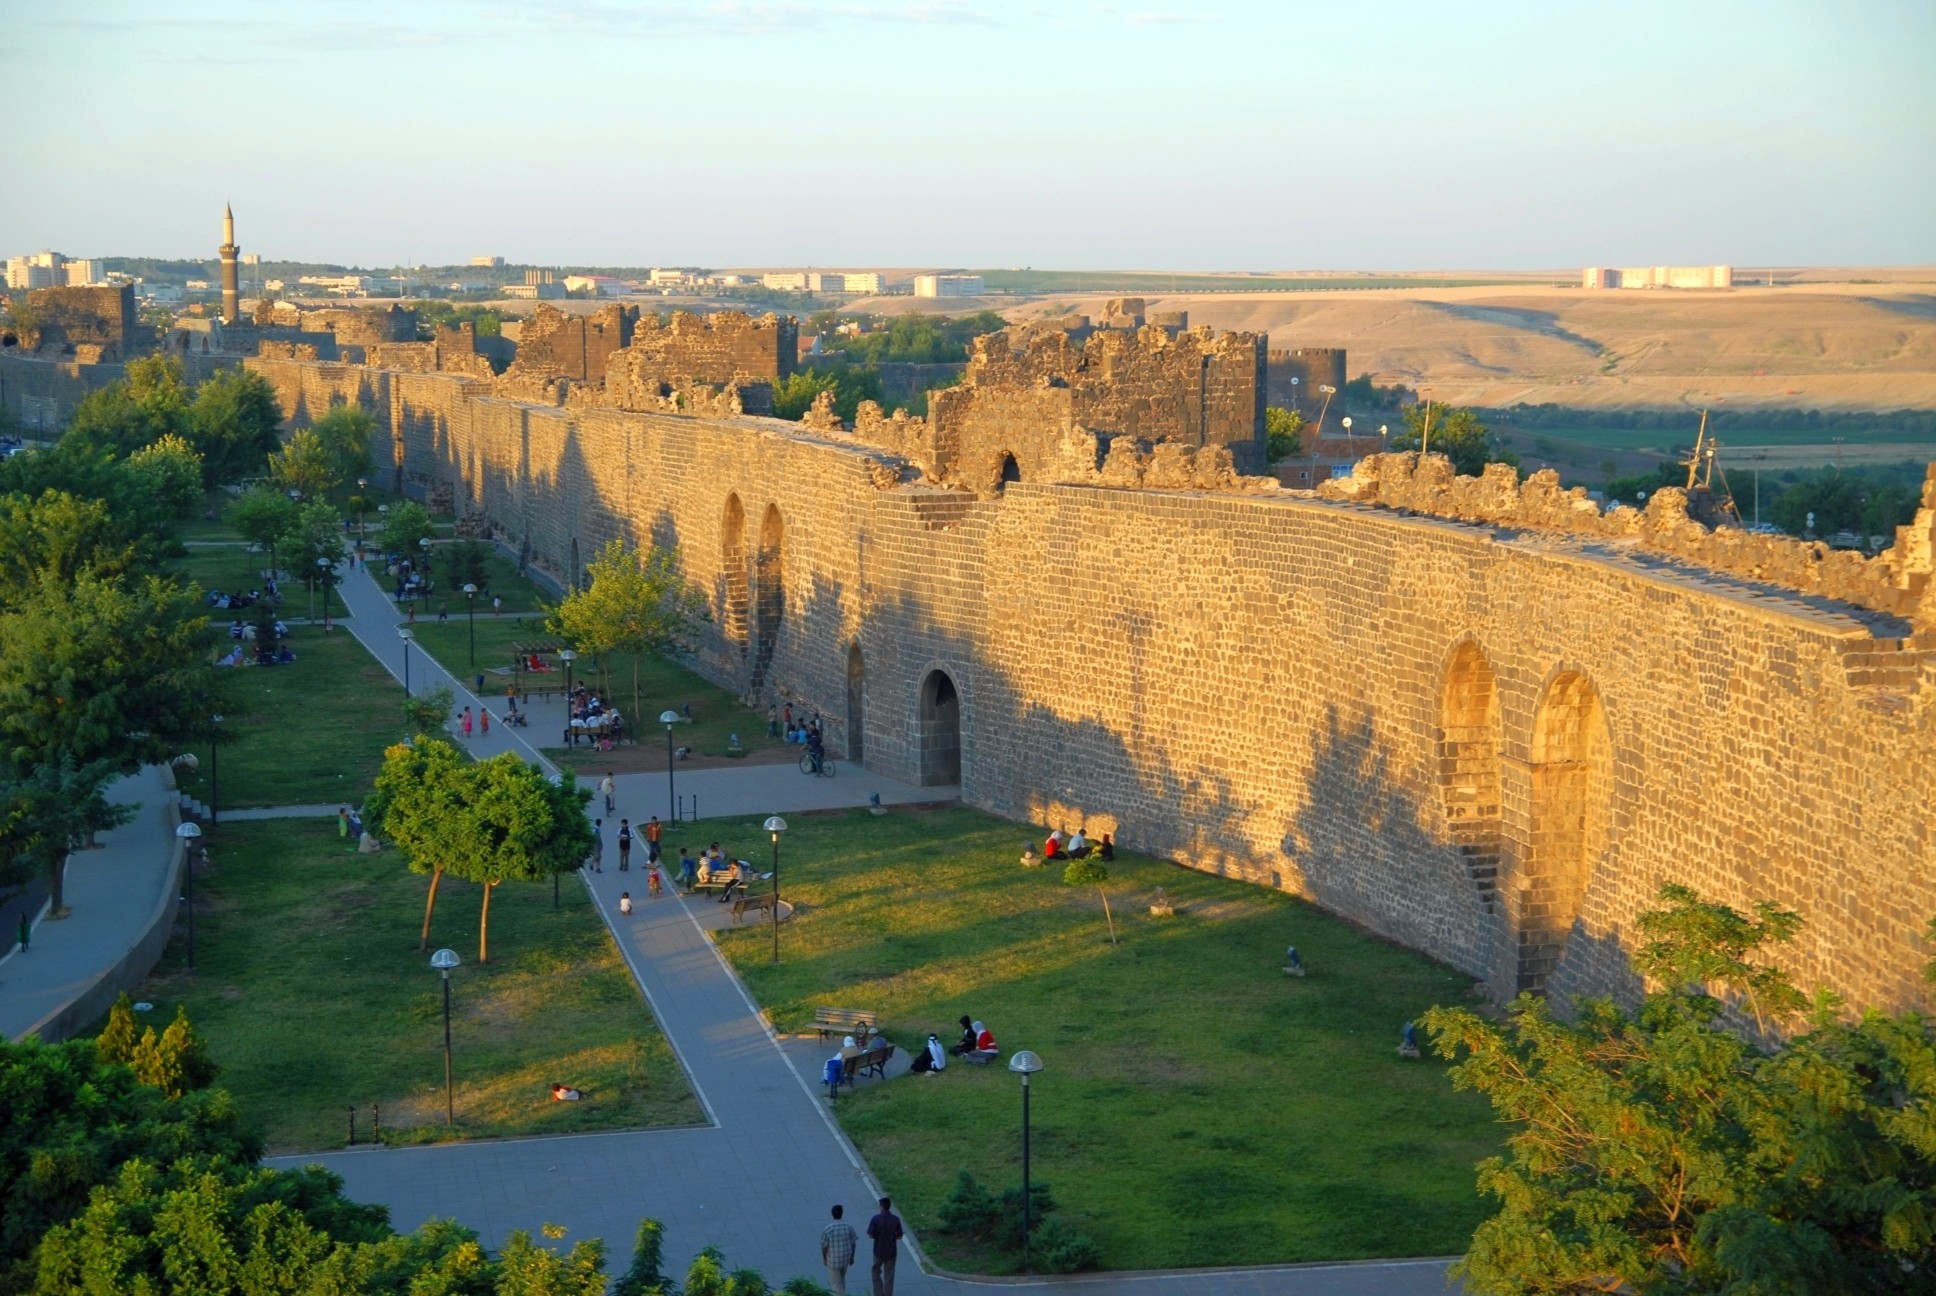 View from the inside of the fortress